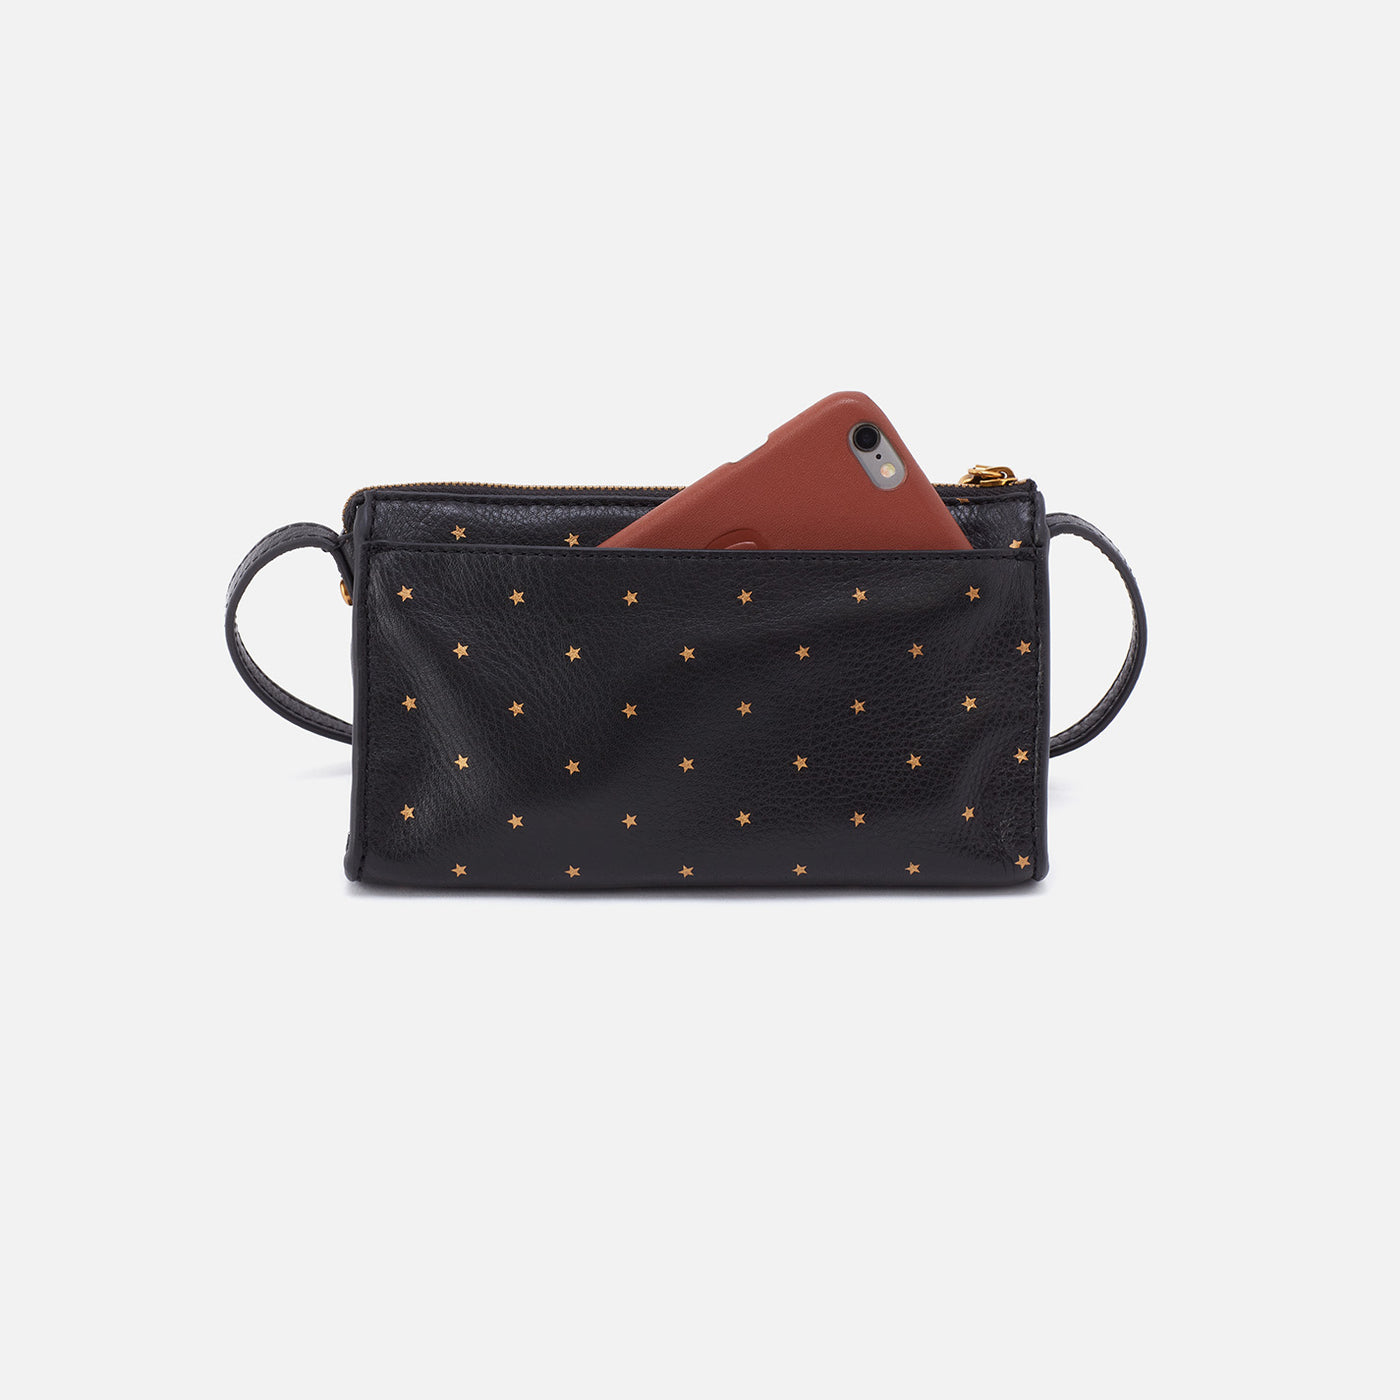 Jewel Crossbody in Pebbled Leather - Black and Gold Stars